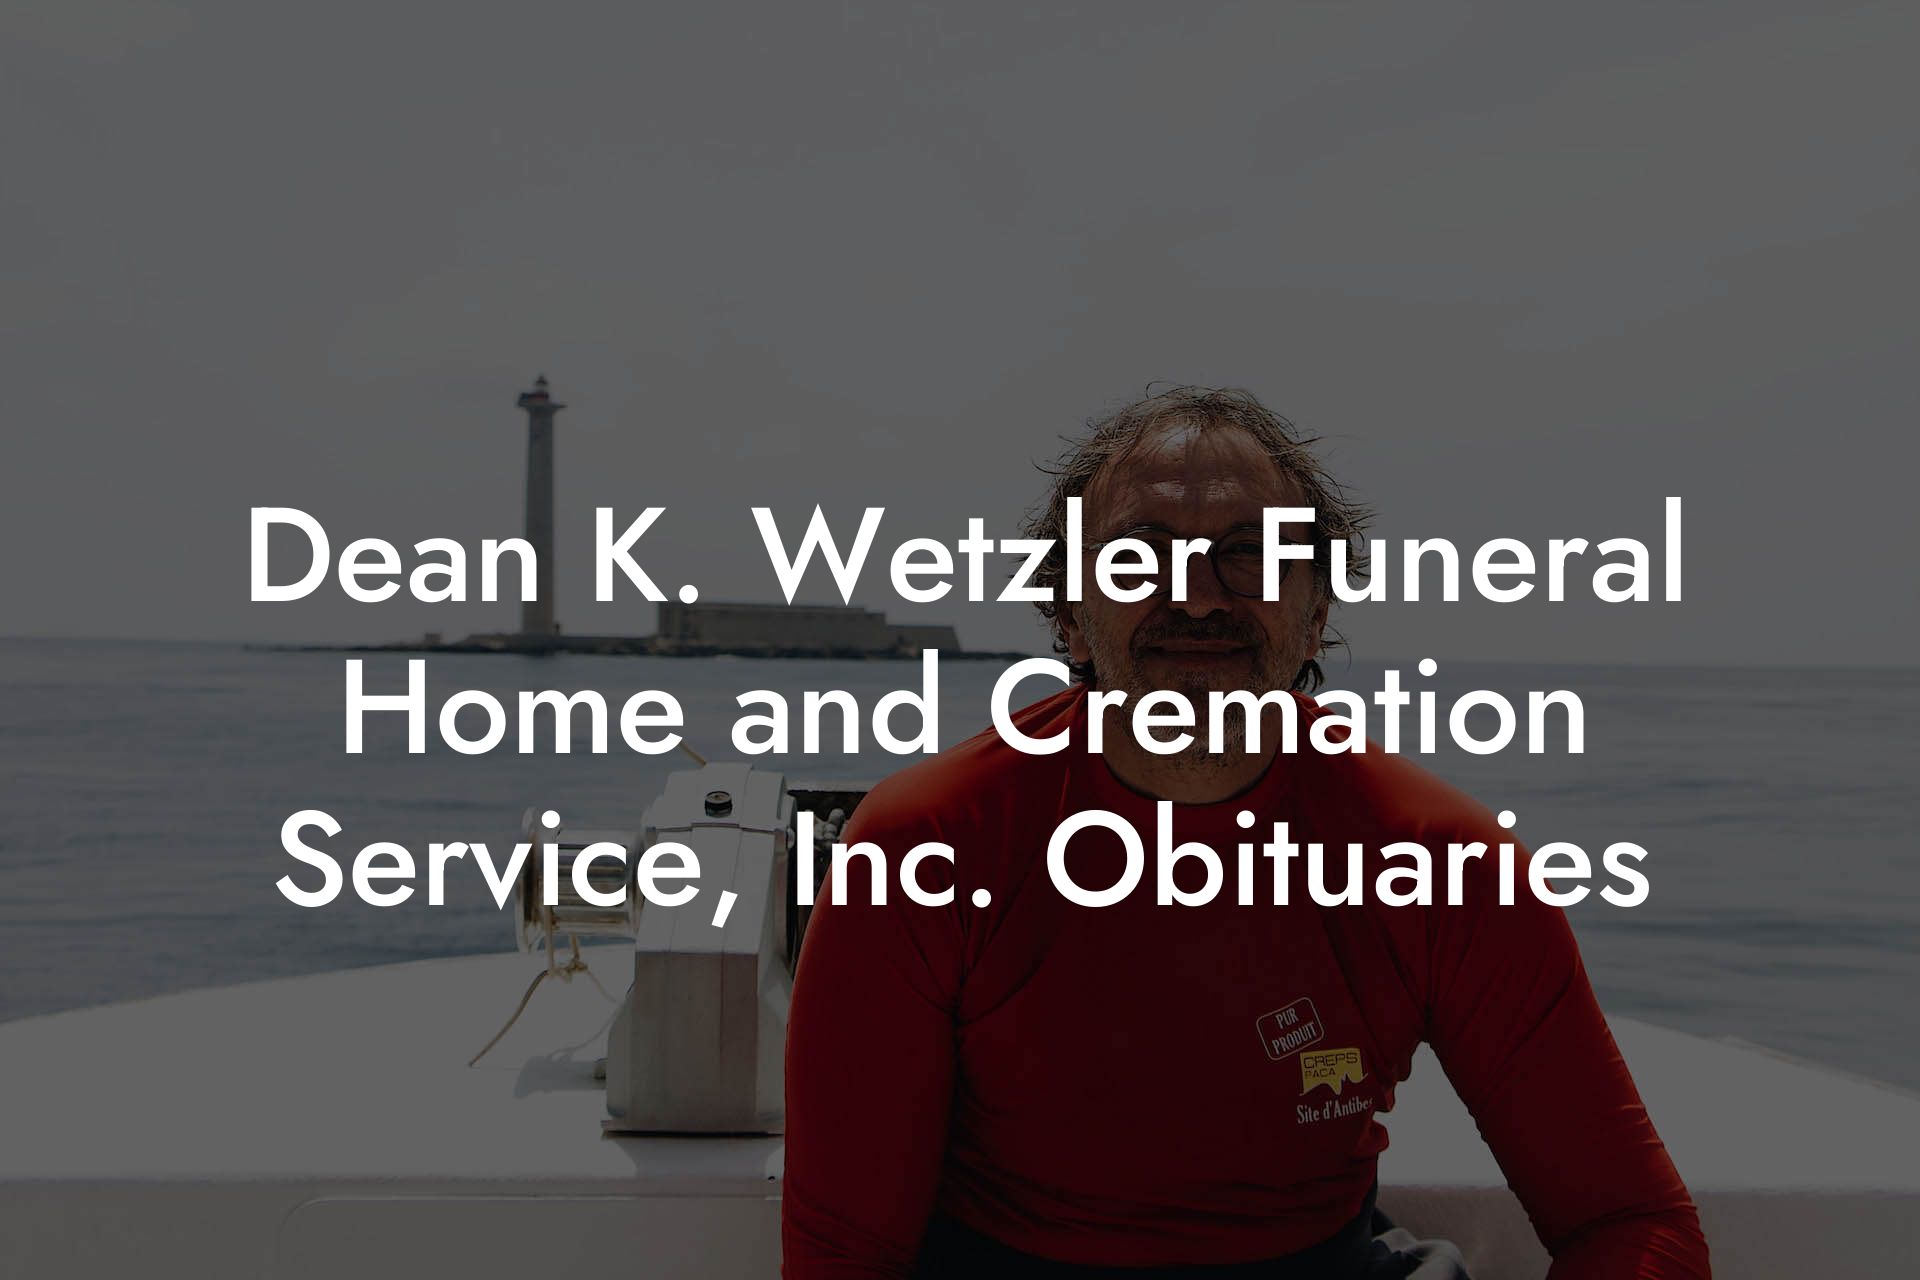 Dean K. Wetzler Funeral Home and Cremation Service, Inc. Obituaries